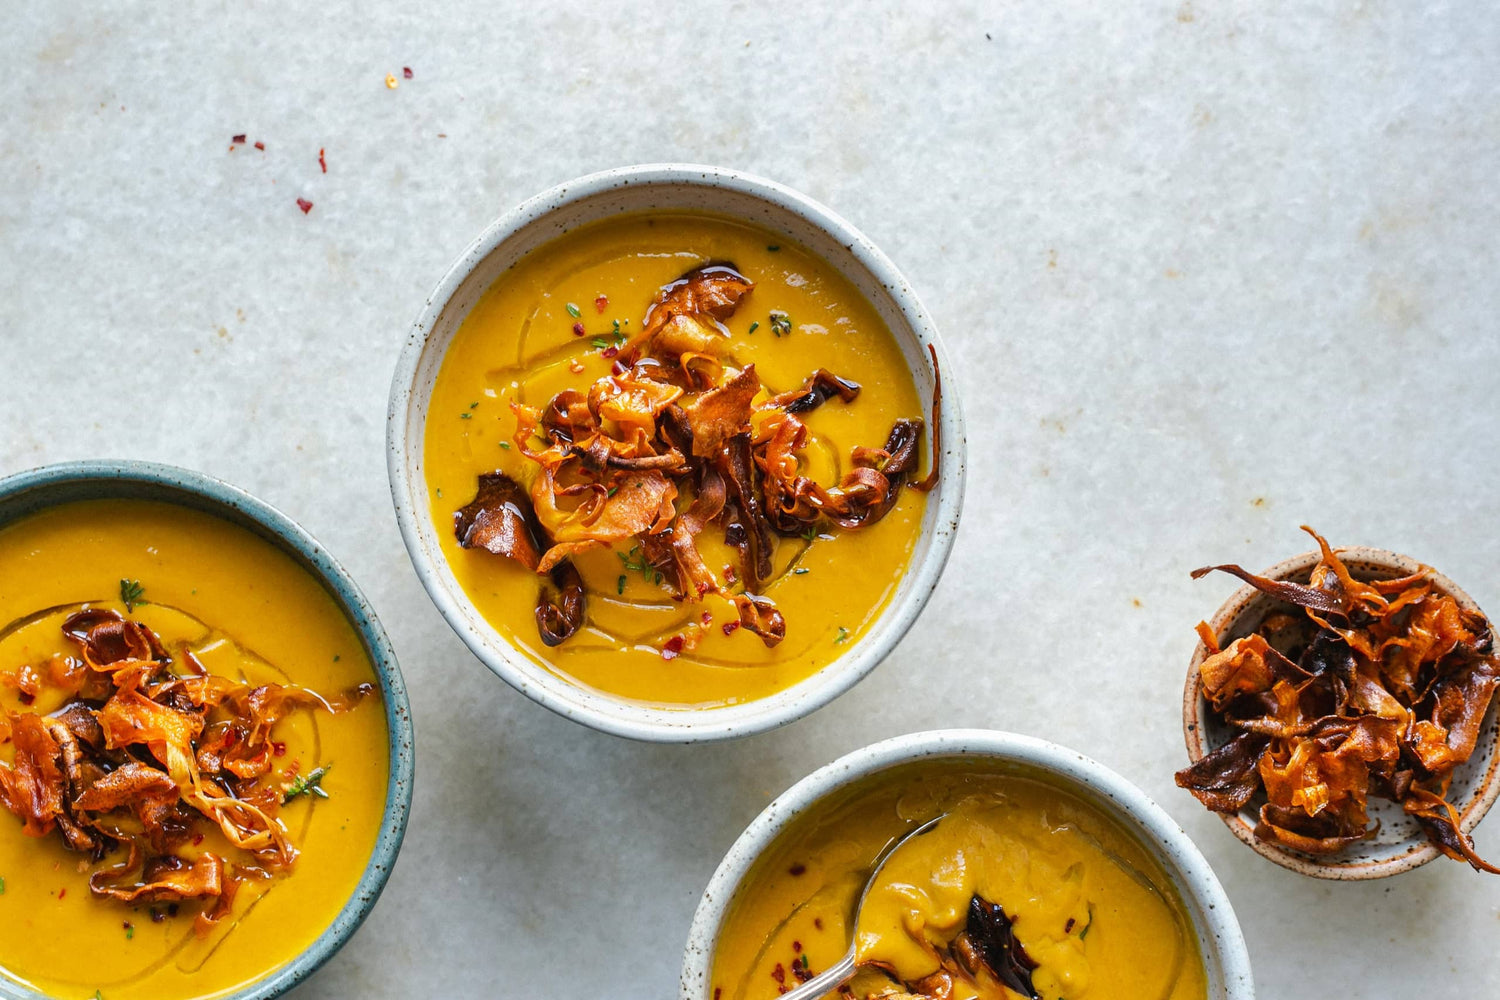 A bowl of roasted carrot and parsnip soup